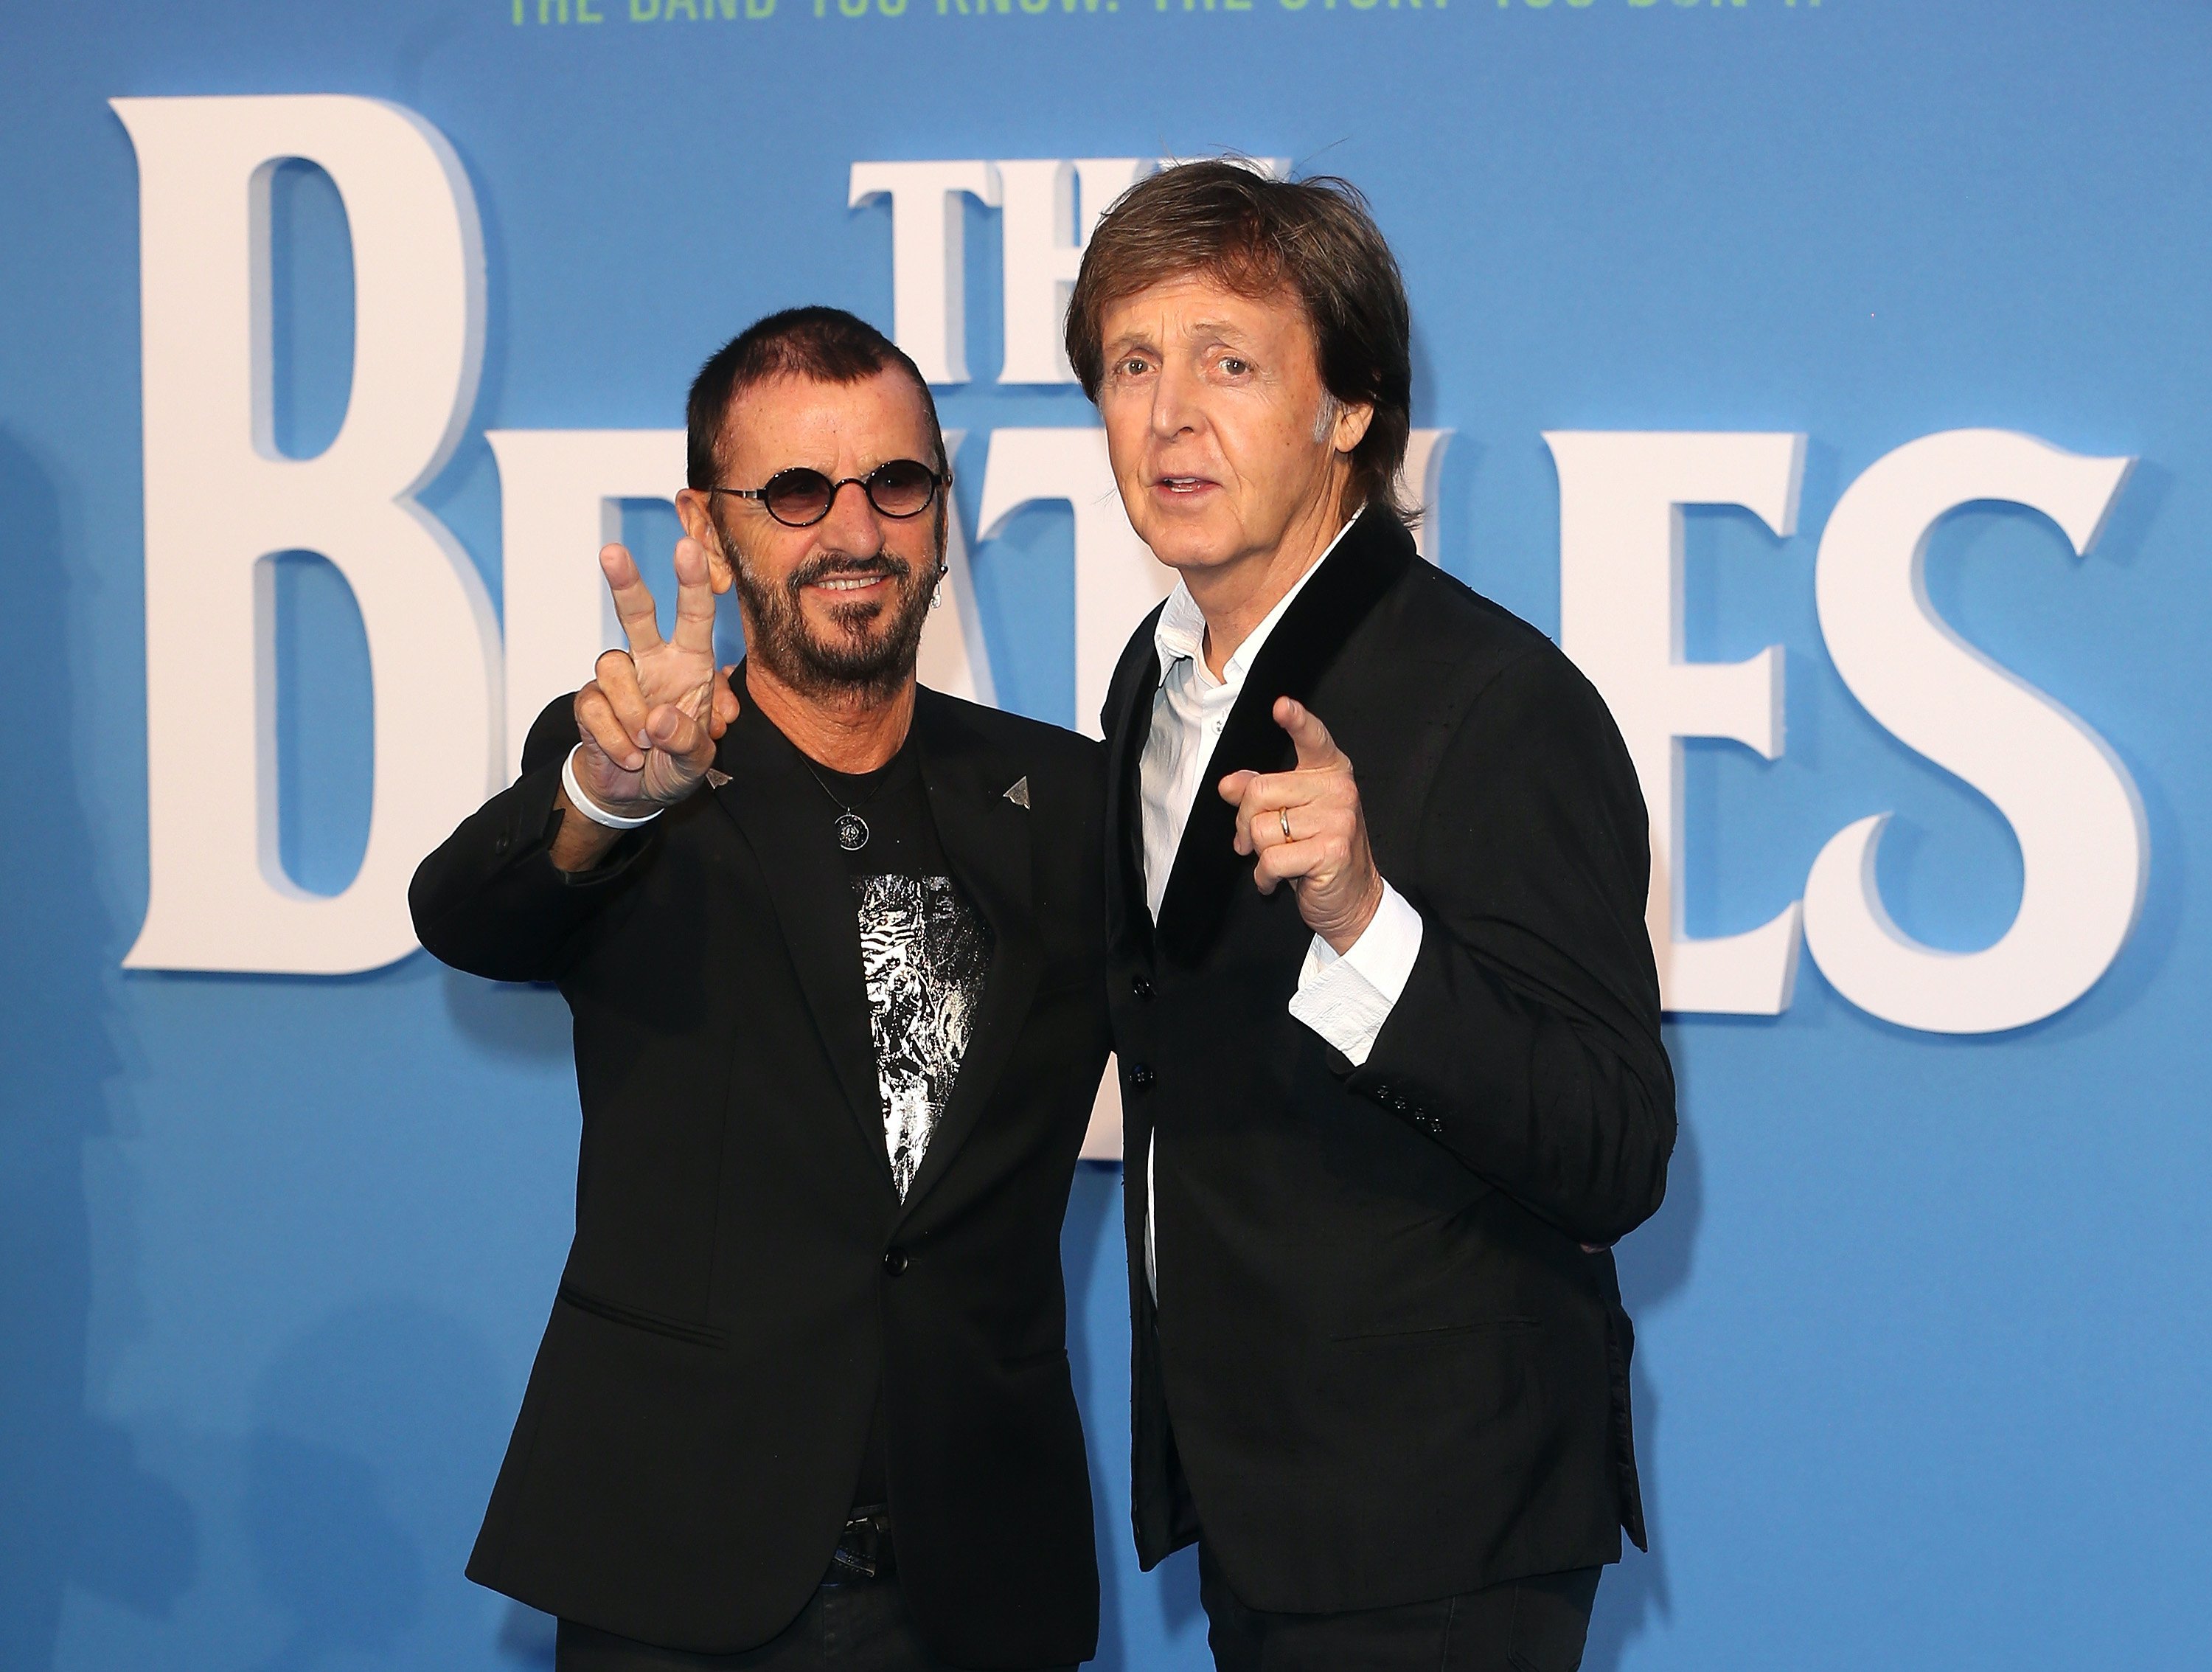 Ringo Starr and Paul McCartney attend the premiere of The Beatles: Eight Days A Week - The Touring Years in London, England